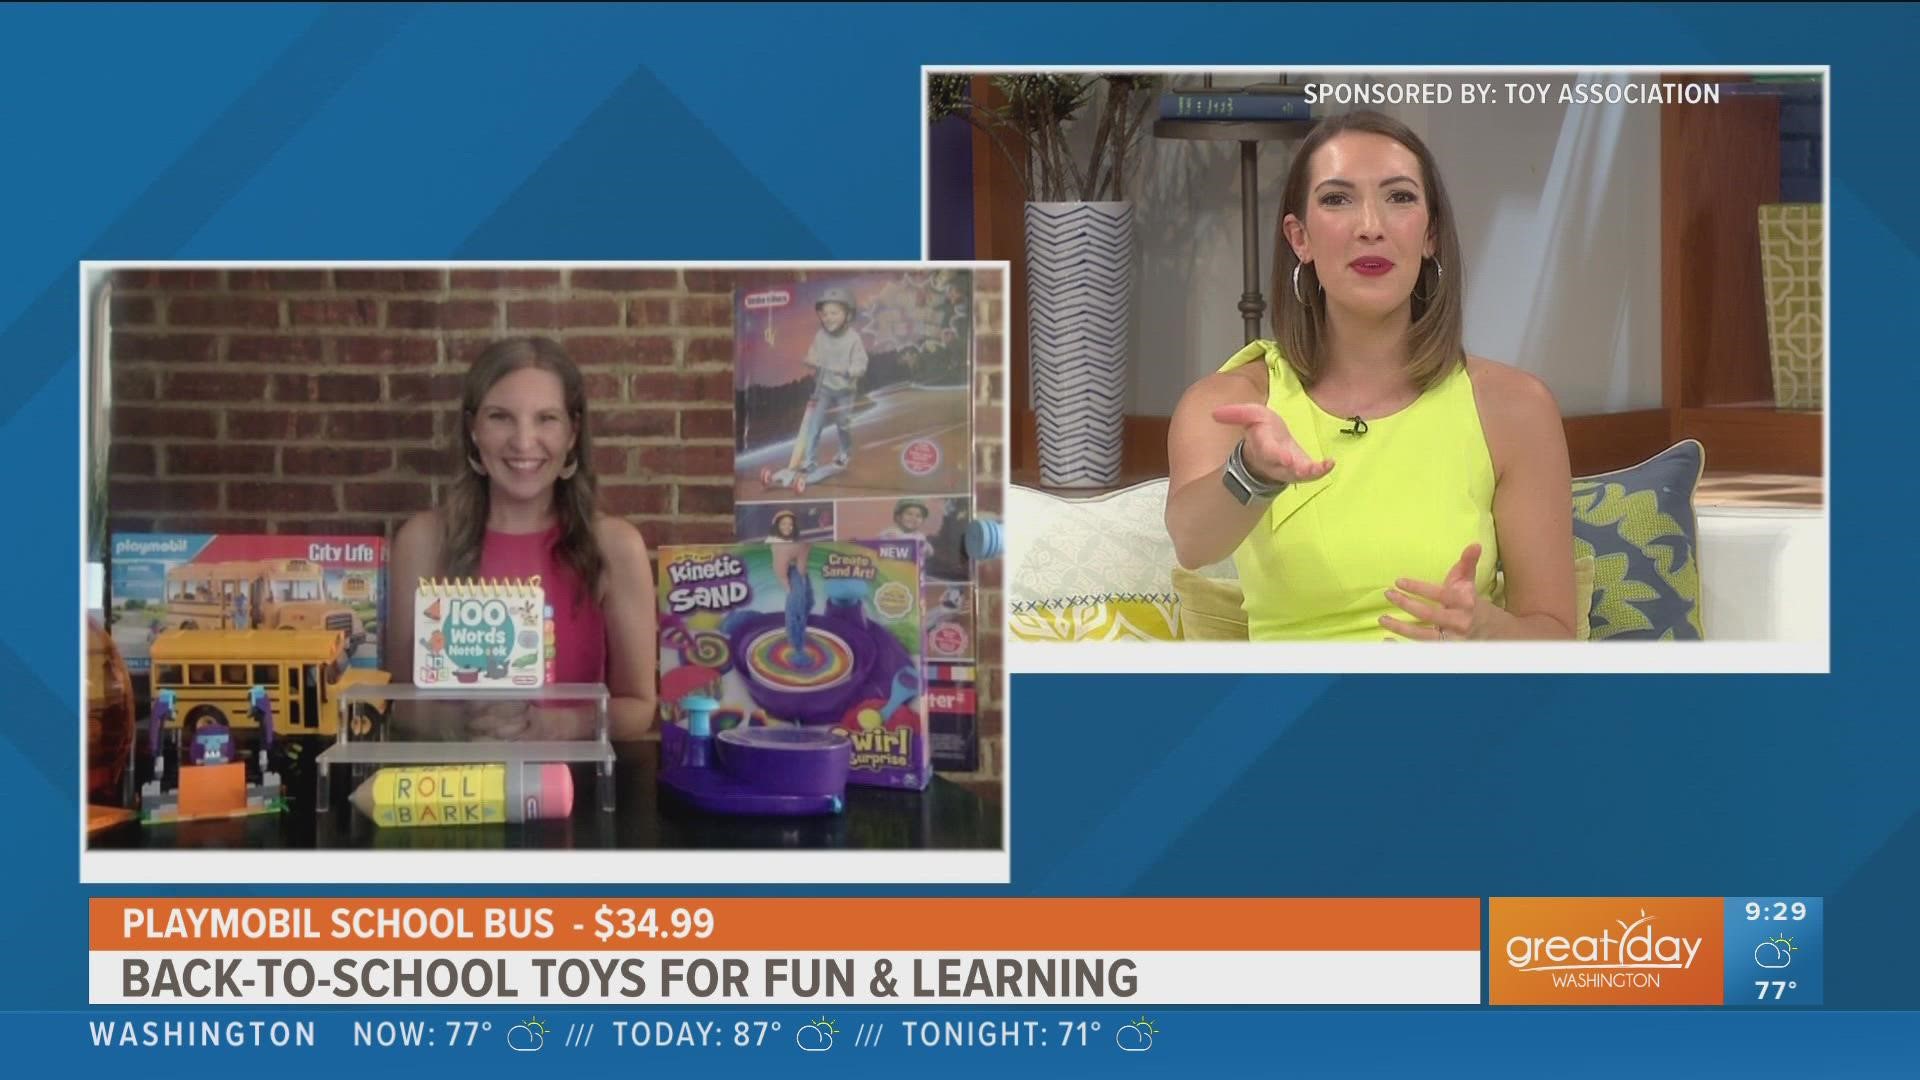 Toys that can help kids learn while having fun